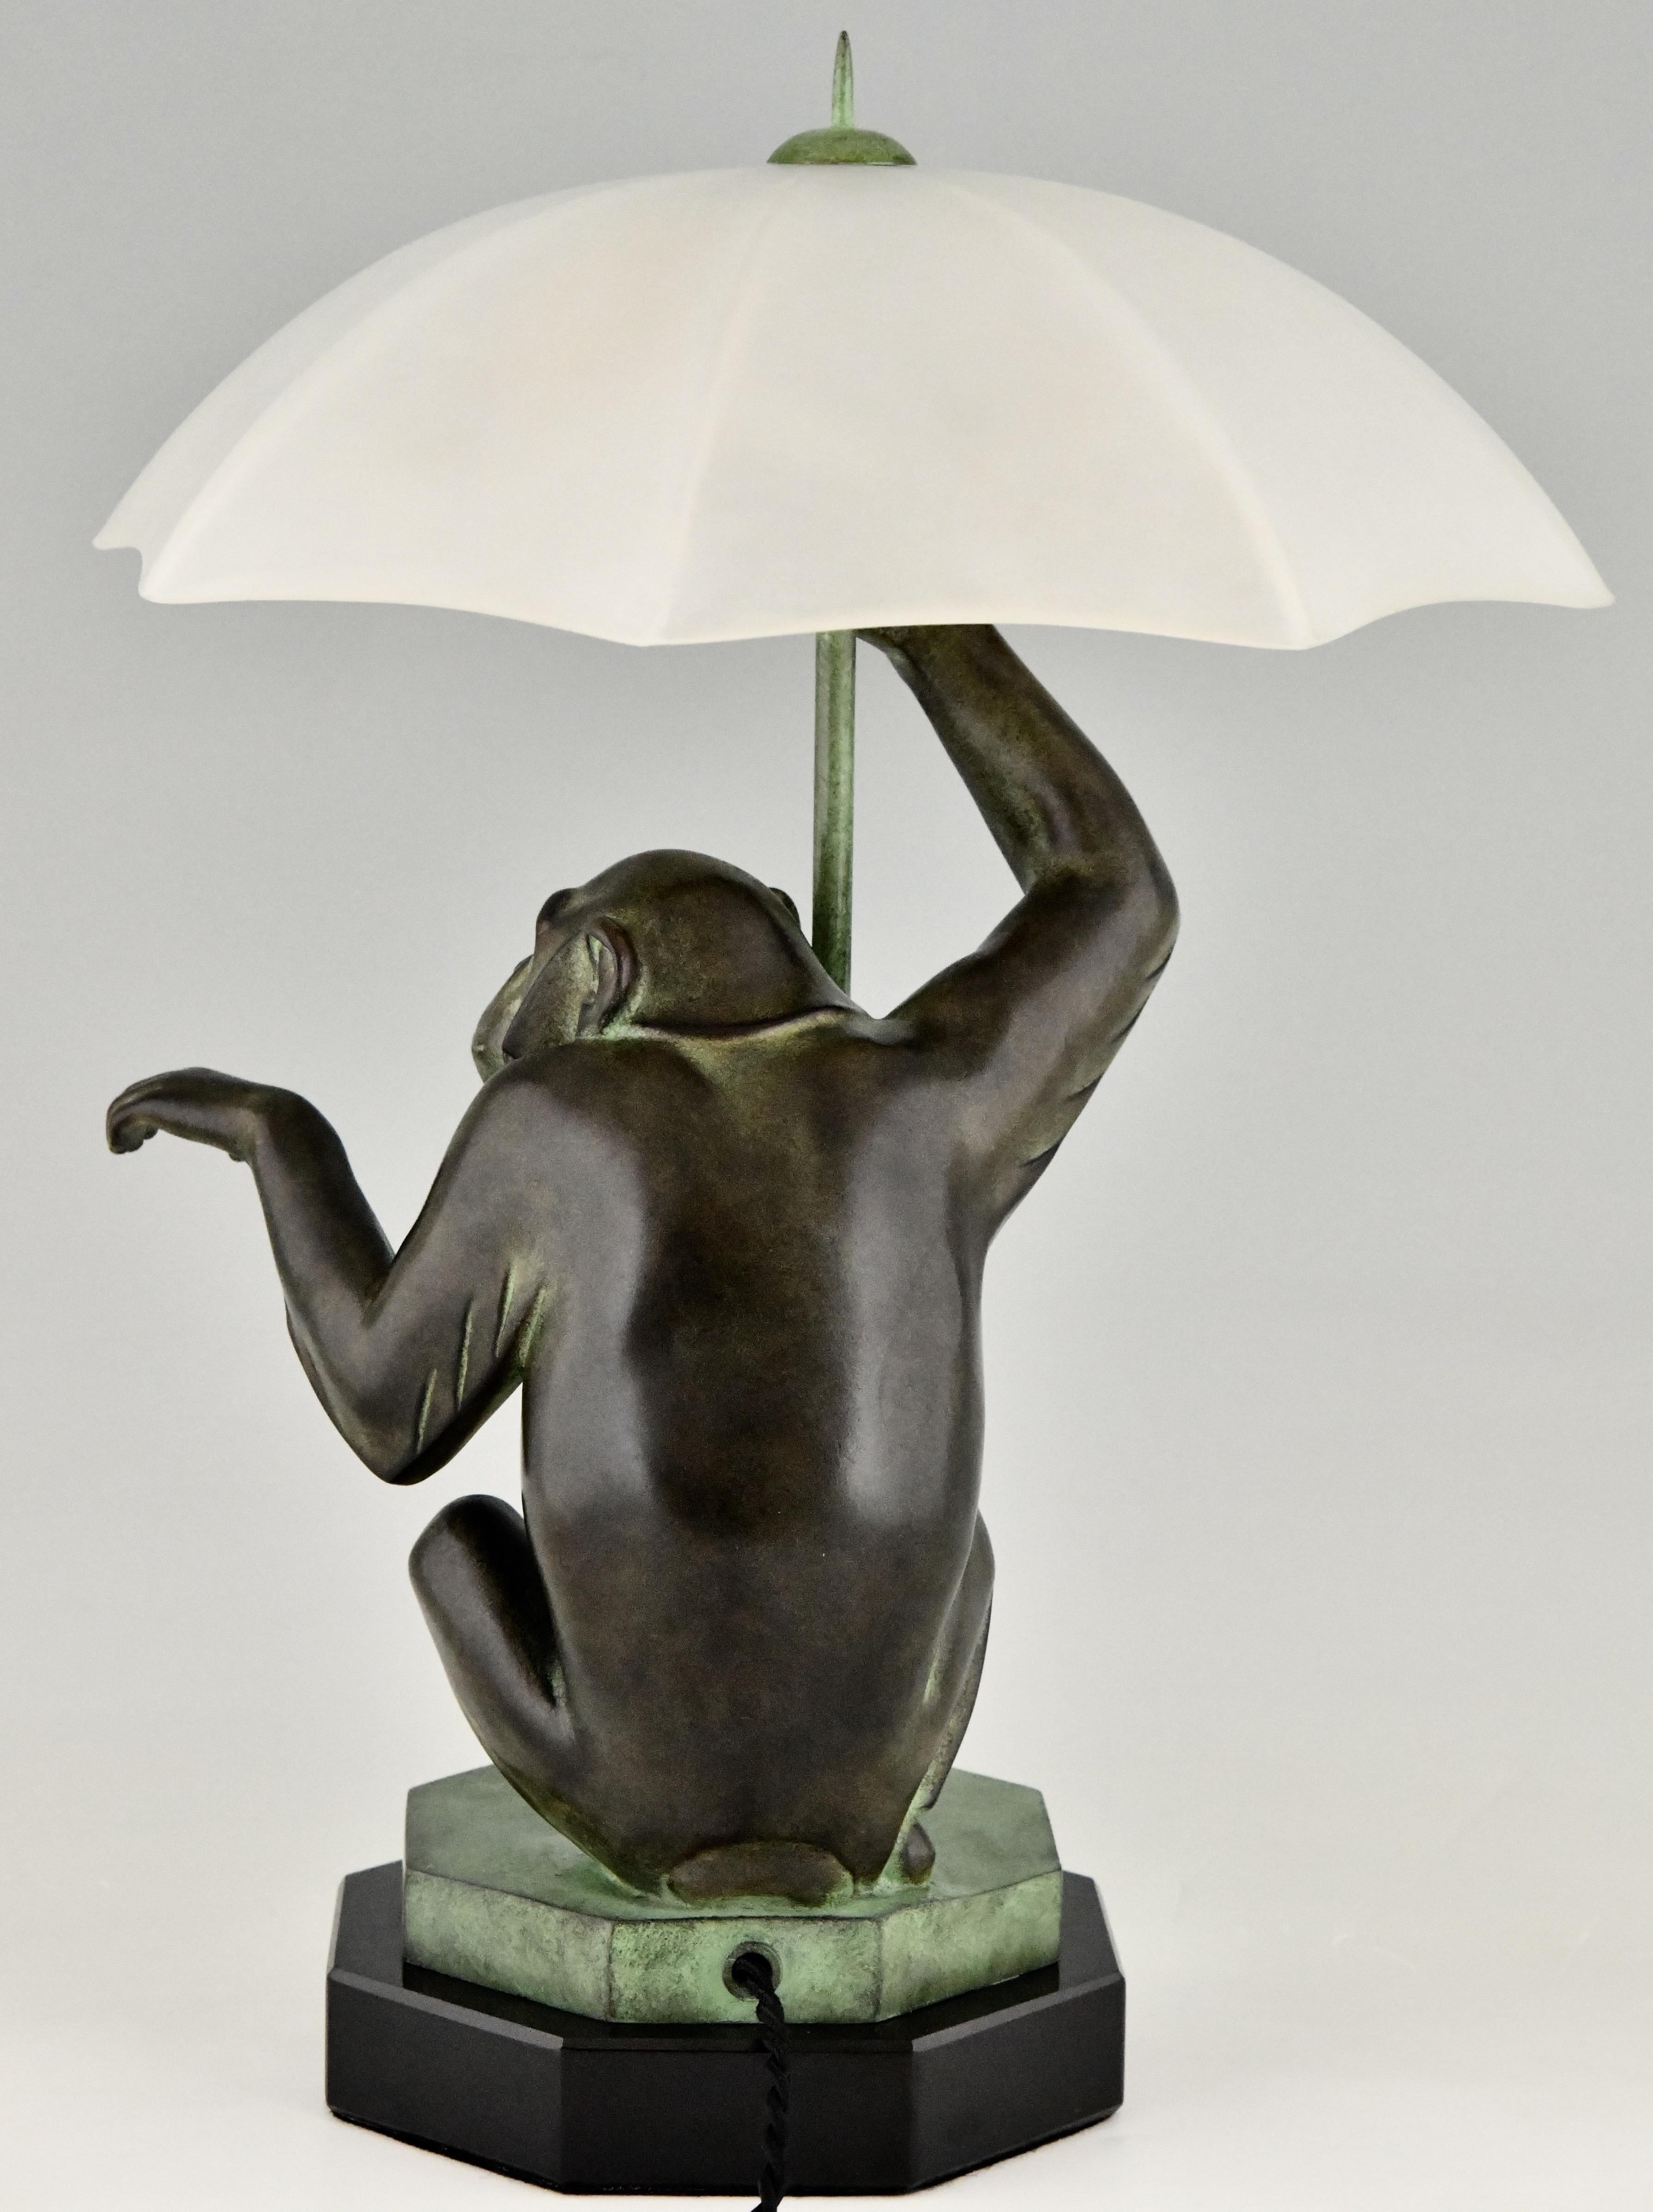 Contemporary Art Deco Style Table Lamp Monkey with Umbrella by Max Le Verrier France